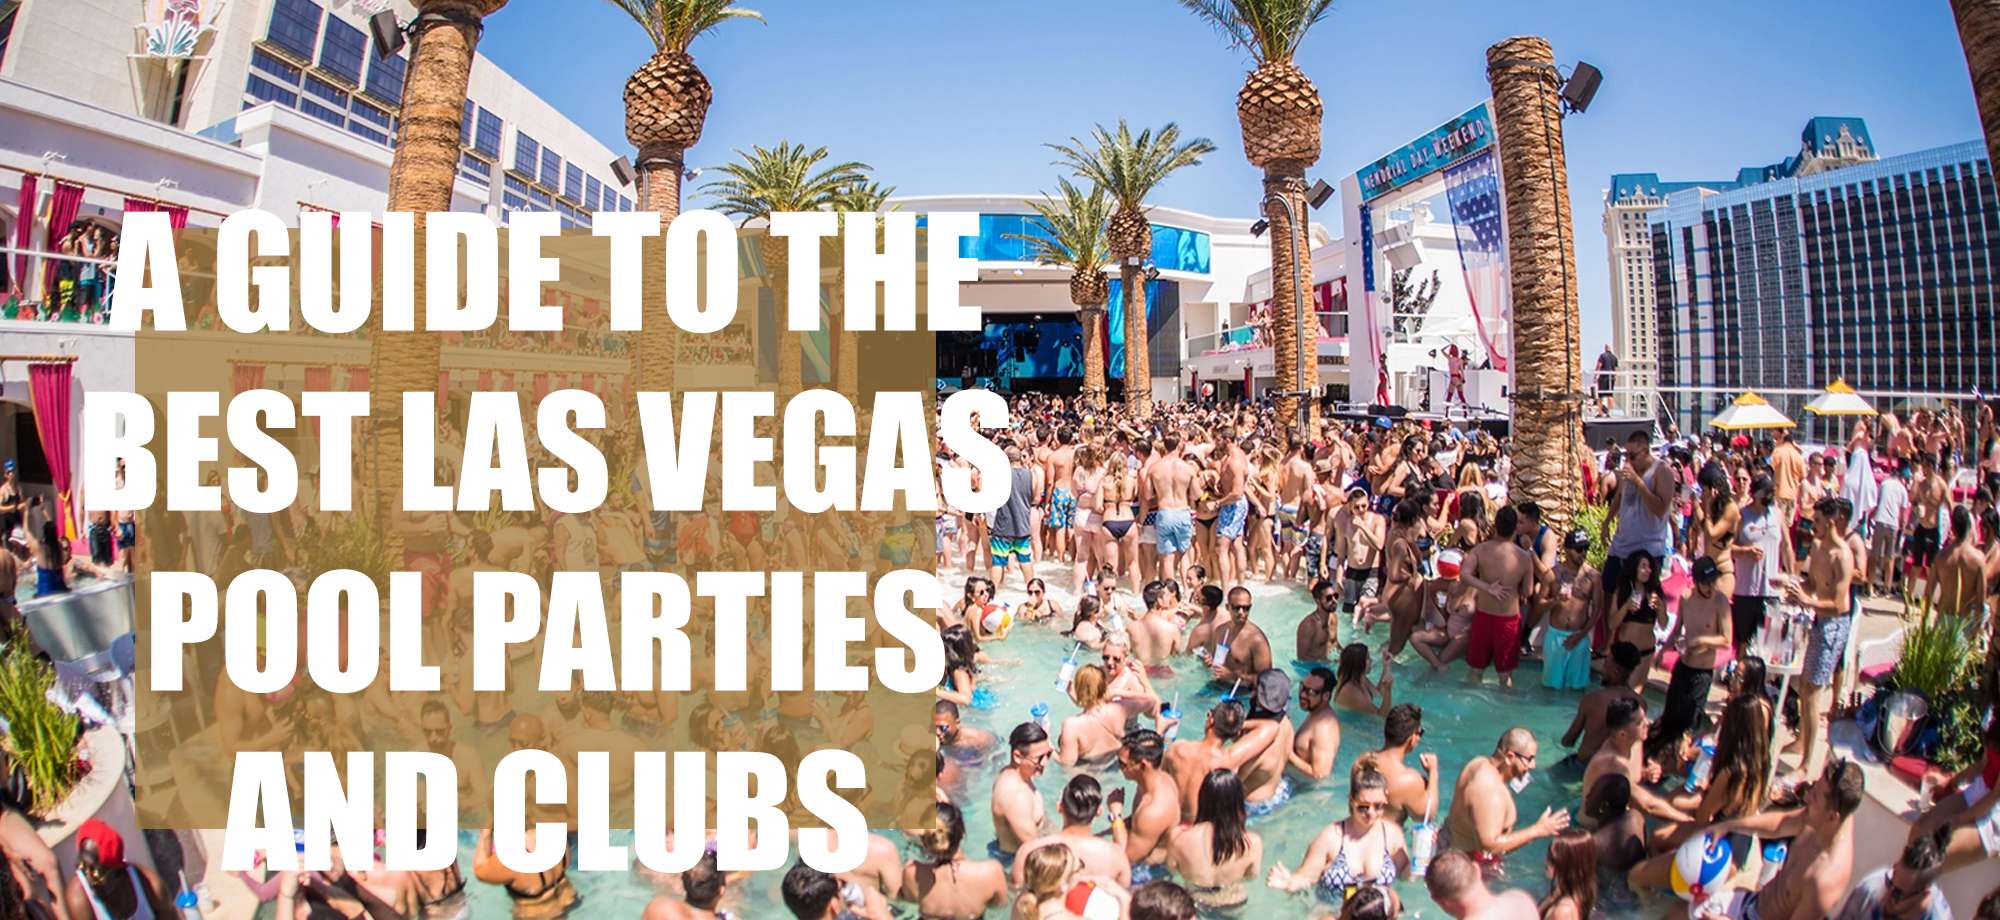 Best Las Vegas Pool Parties And Clubs Club Bookers